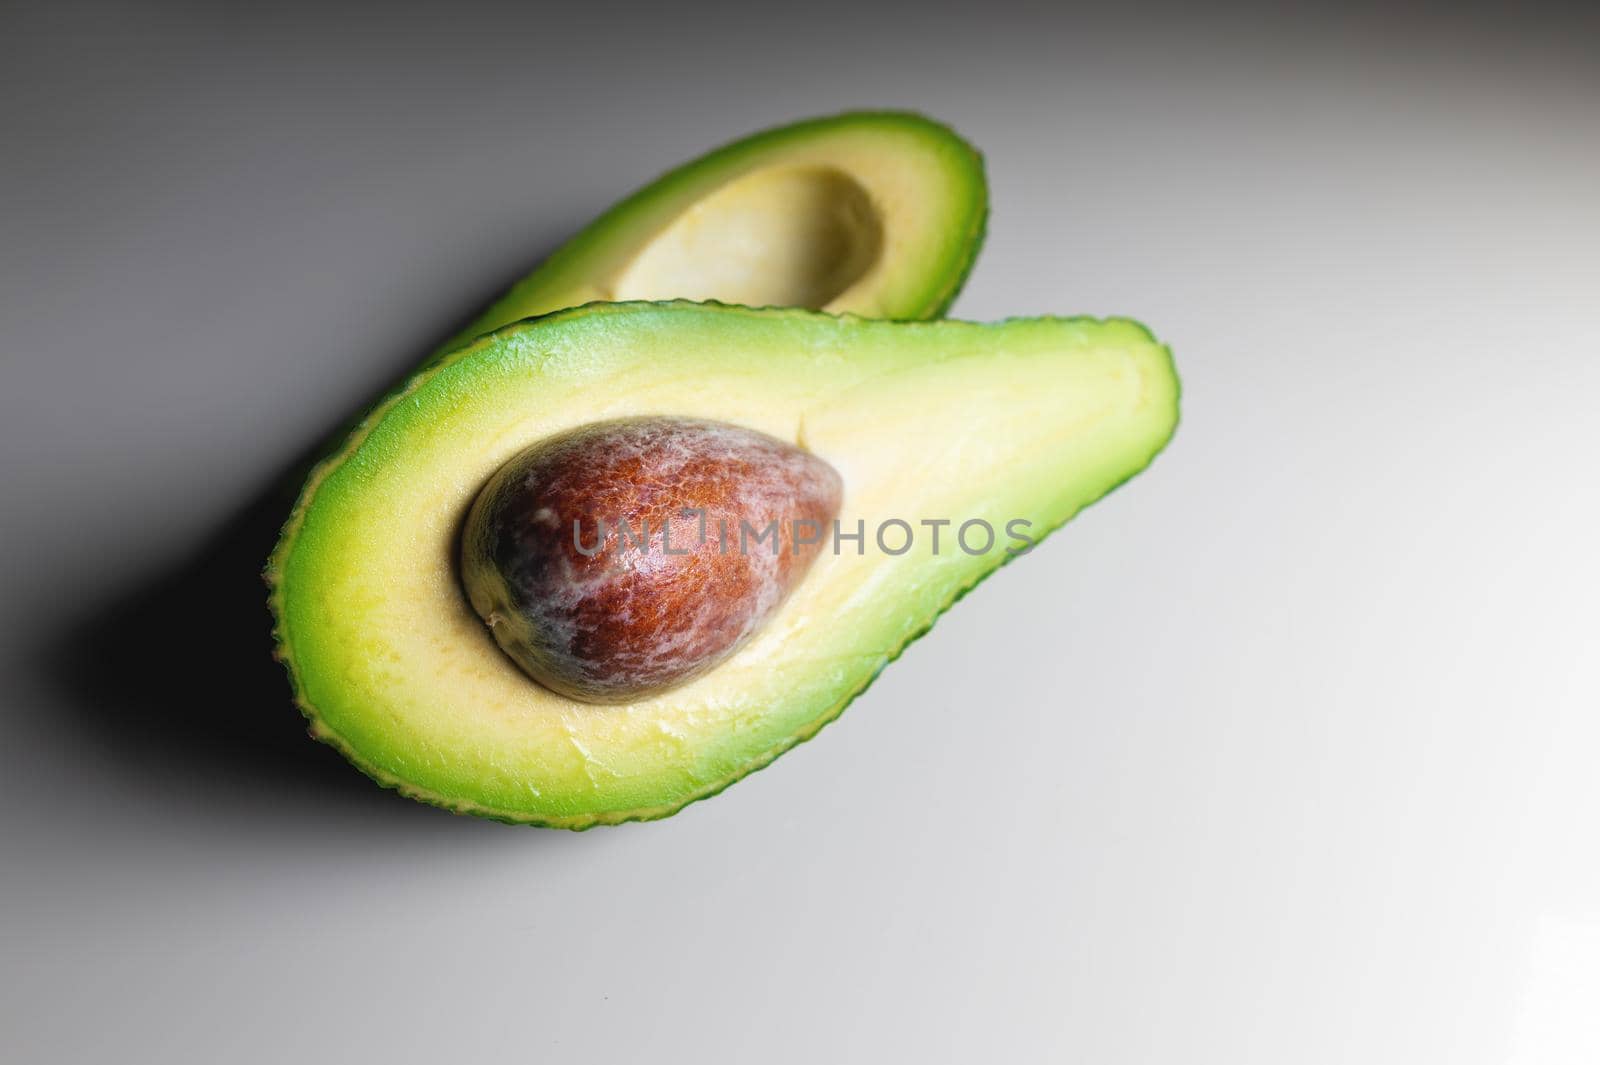 Avocado on old wooden table.Halfs on wooden bowl. Fruits healthy food concept